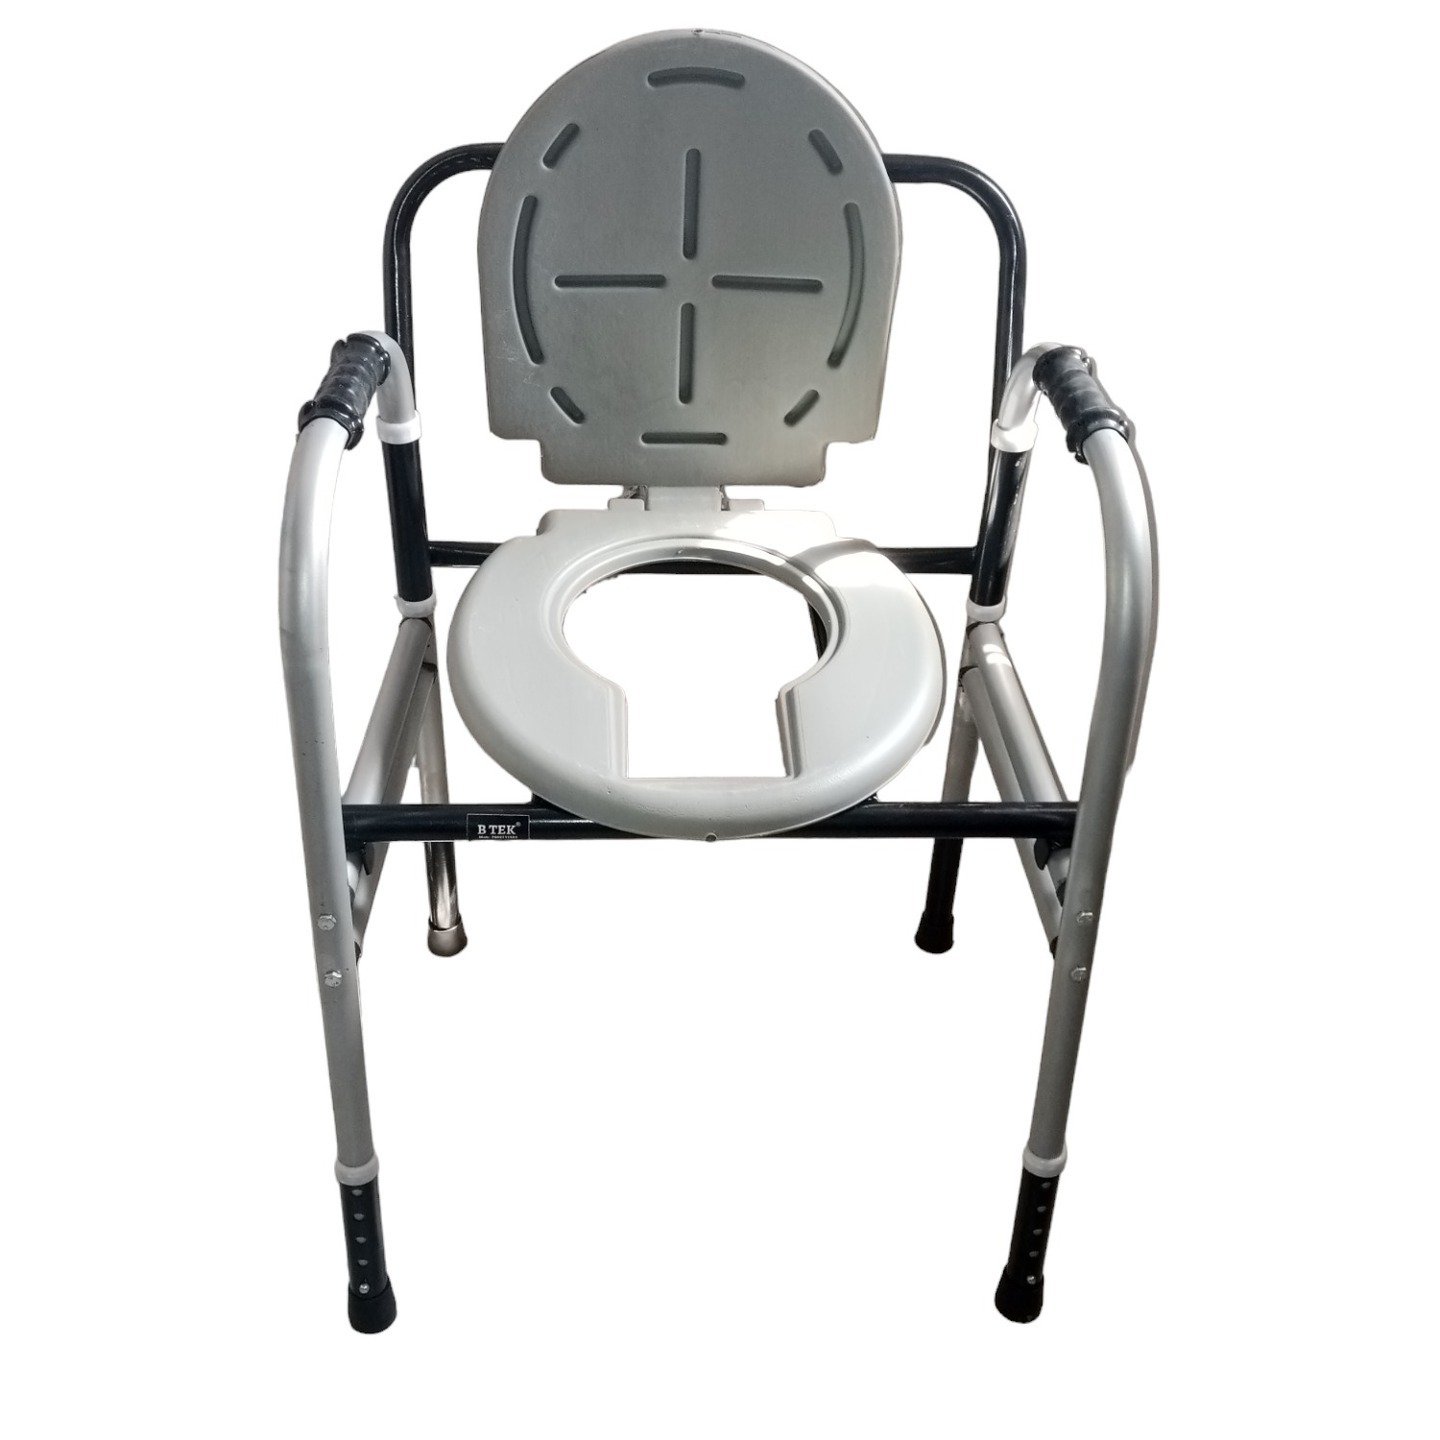 Shower Chair Height Adjustable & Foldable